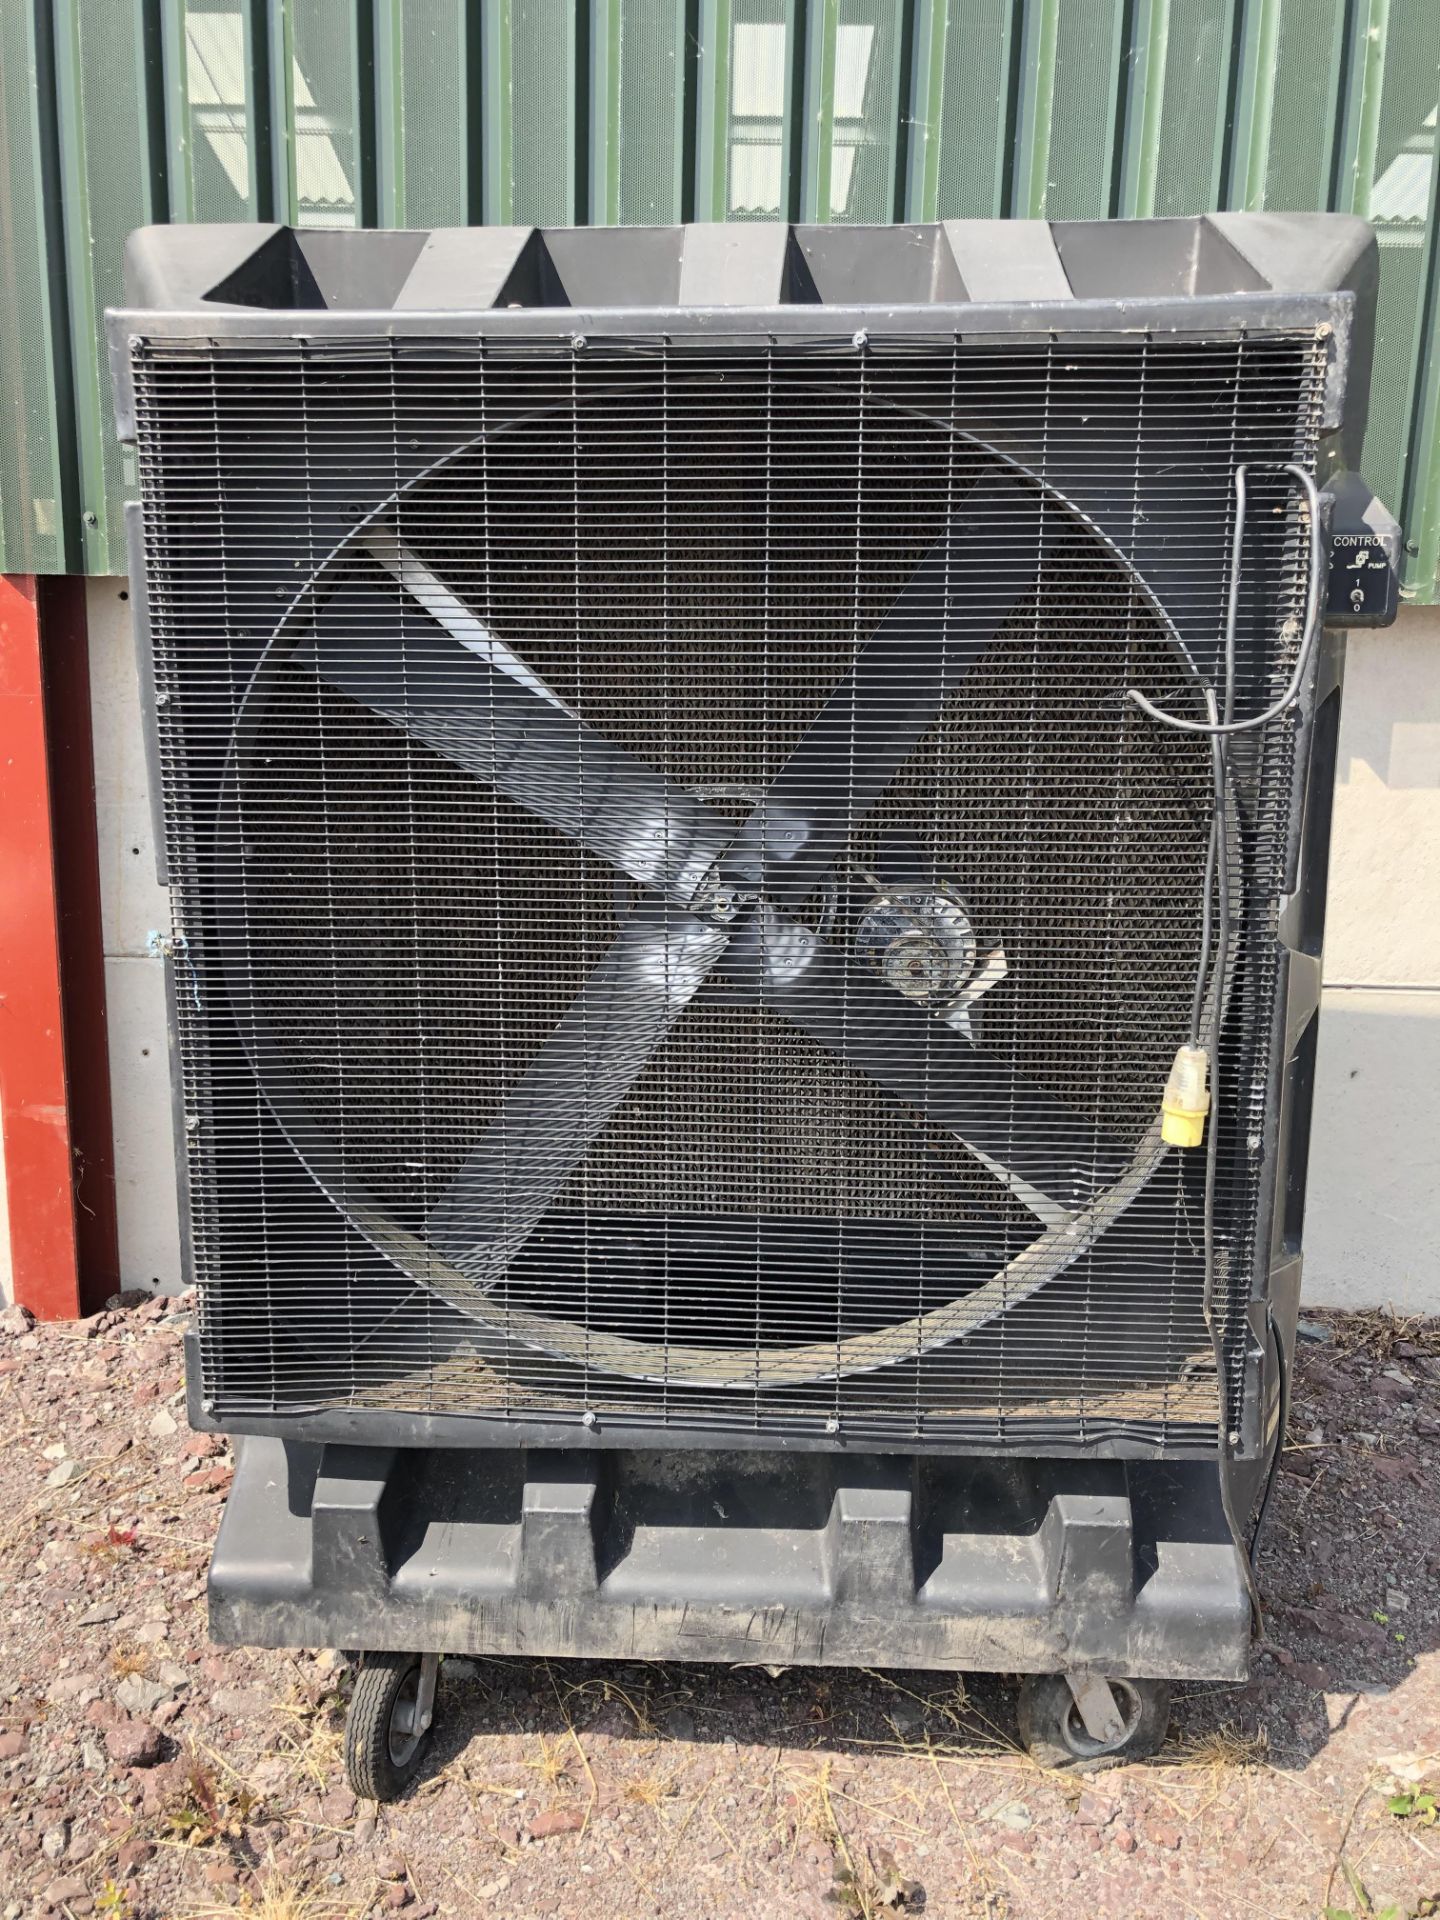 Industrial Fan - Also has an A/C setting (was used as fan though)